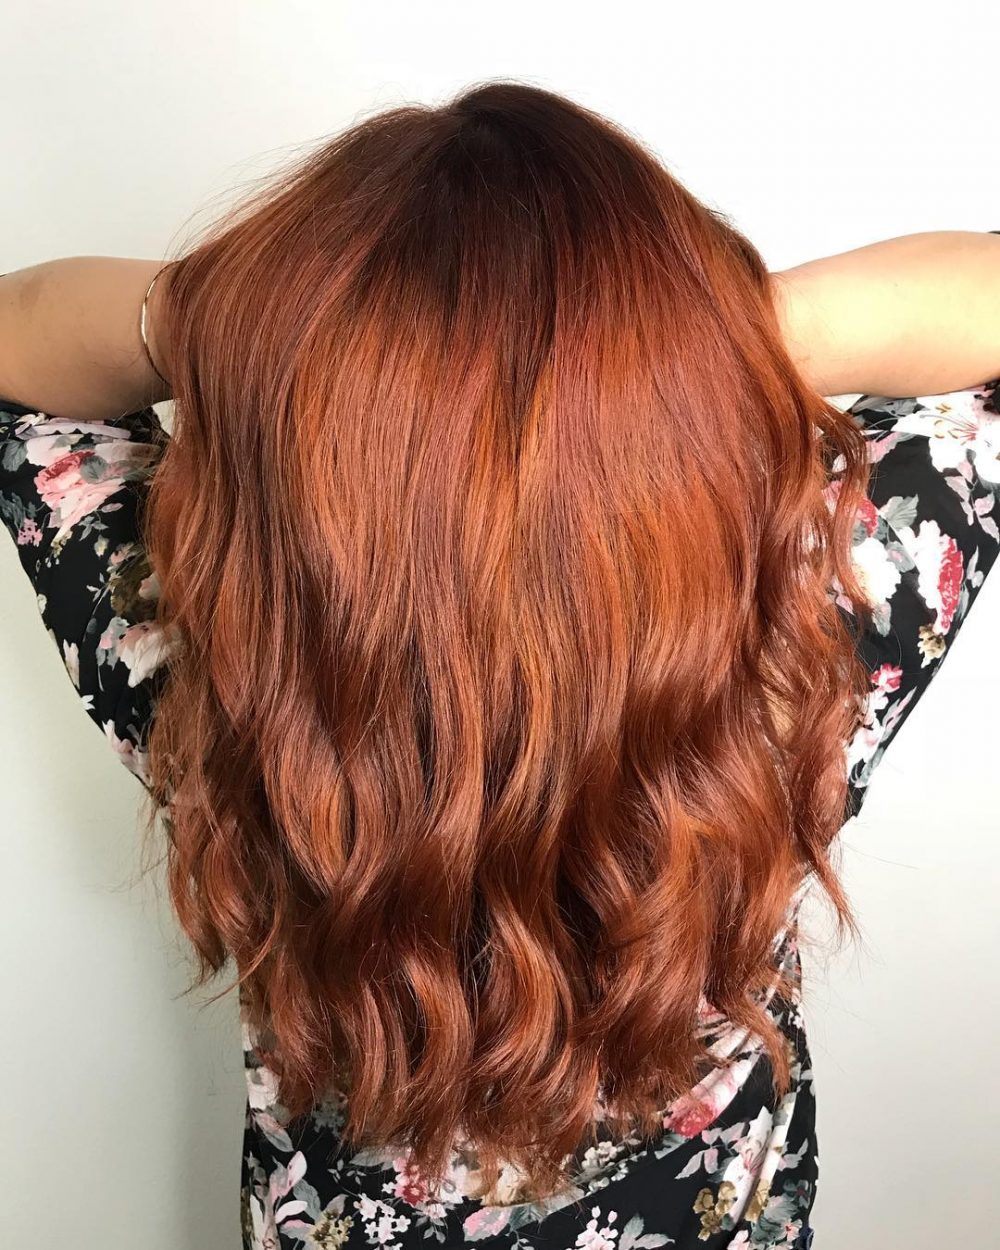 Dimensional Copper Waves hairstyle